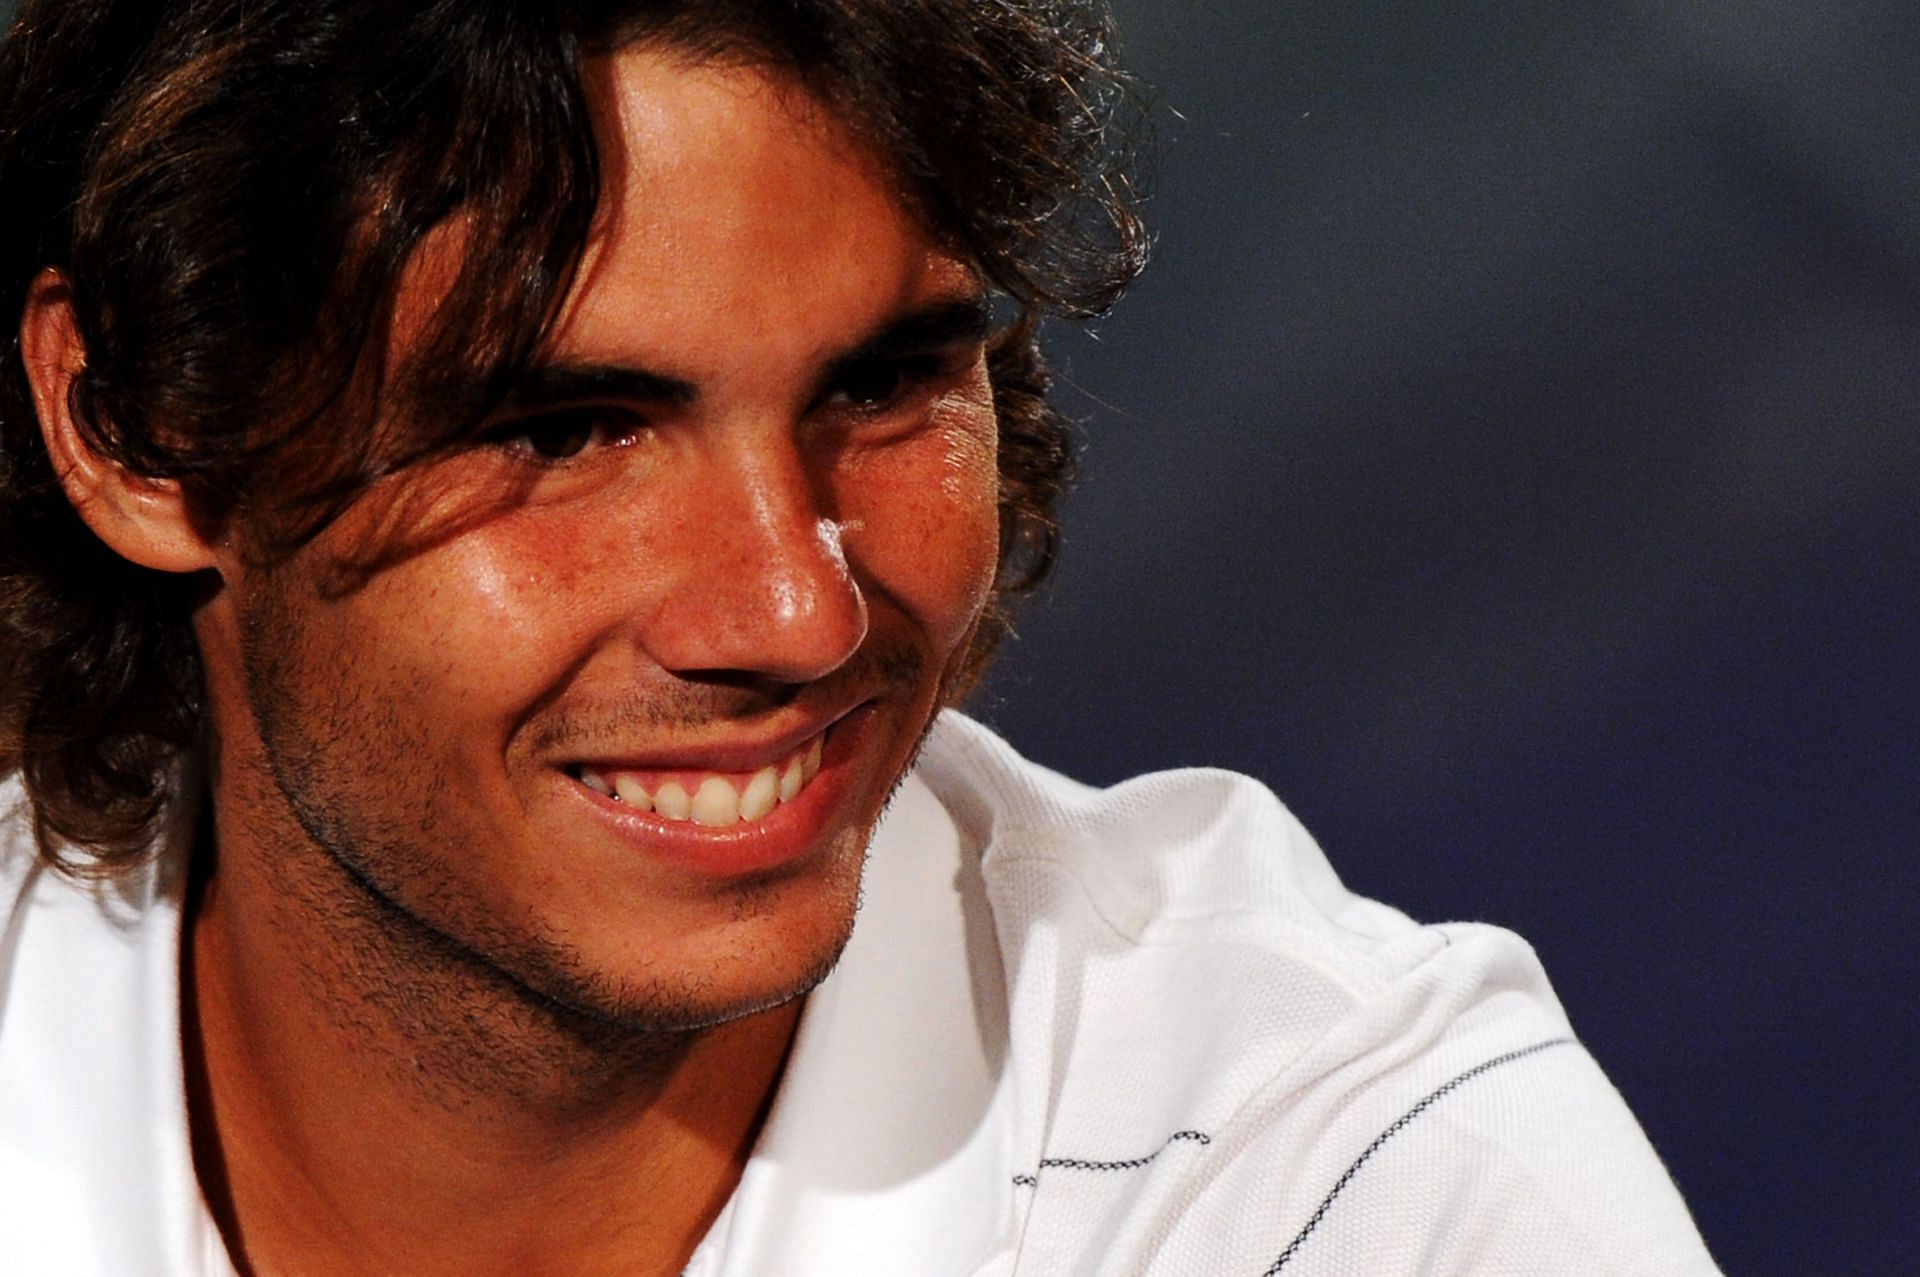 Rafael Nadal admitted that he needs to become more organized than before